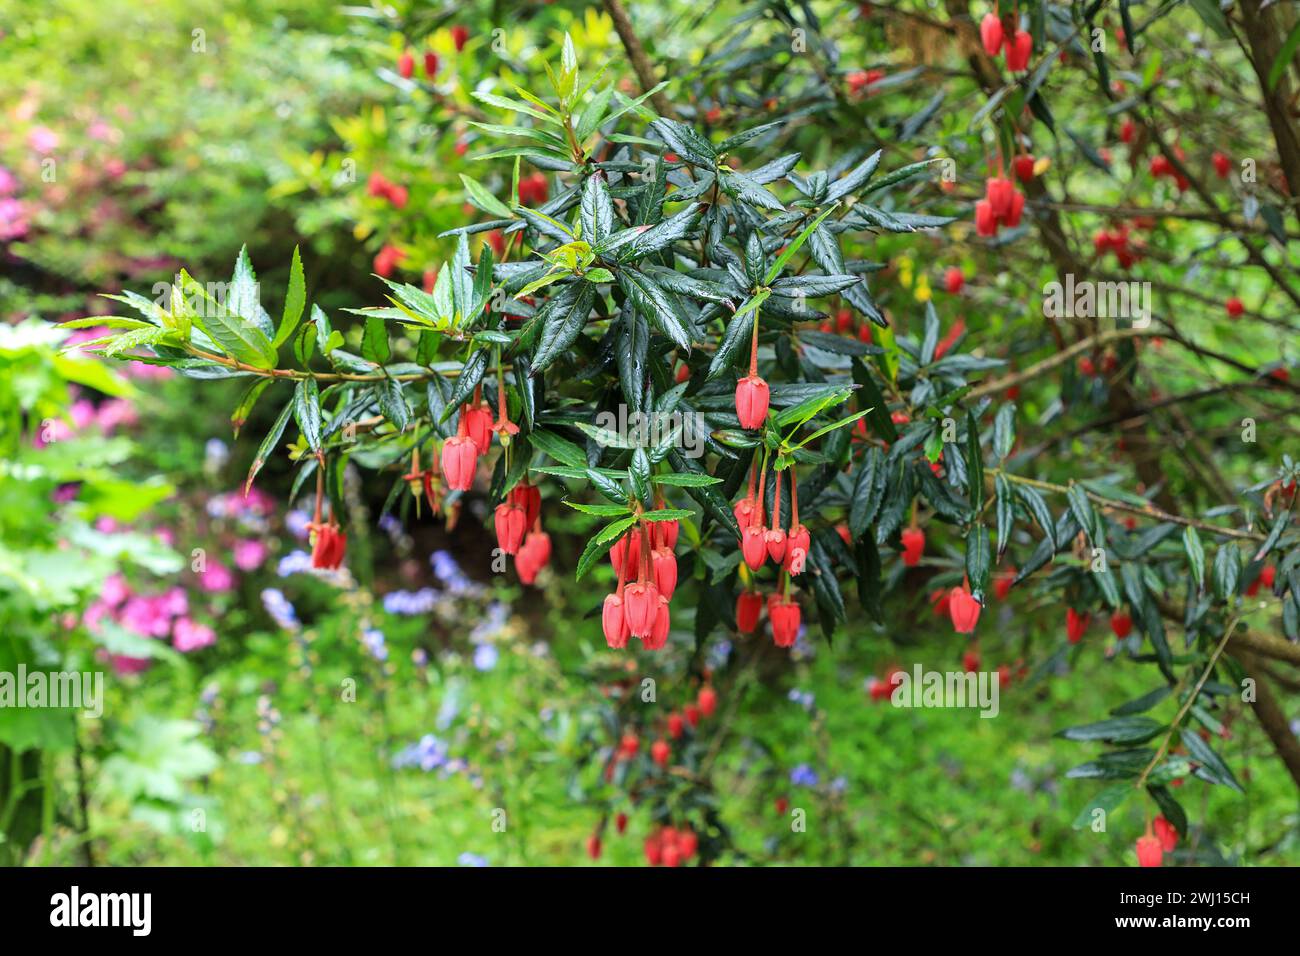 The bright red bell like flowers of Chilean lantern tree (Crinodendron hookerianum) or (tricuspidaria lanceolata), Cornwall, England, UK Stock Photo